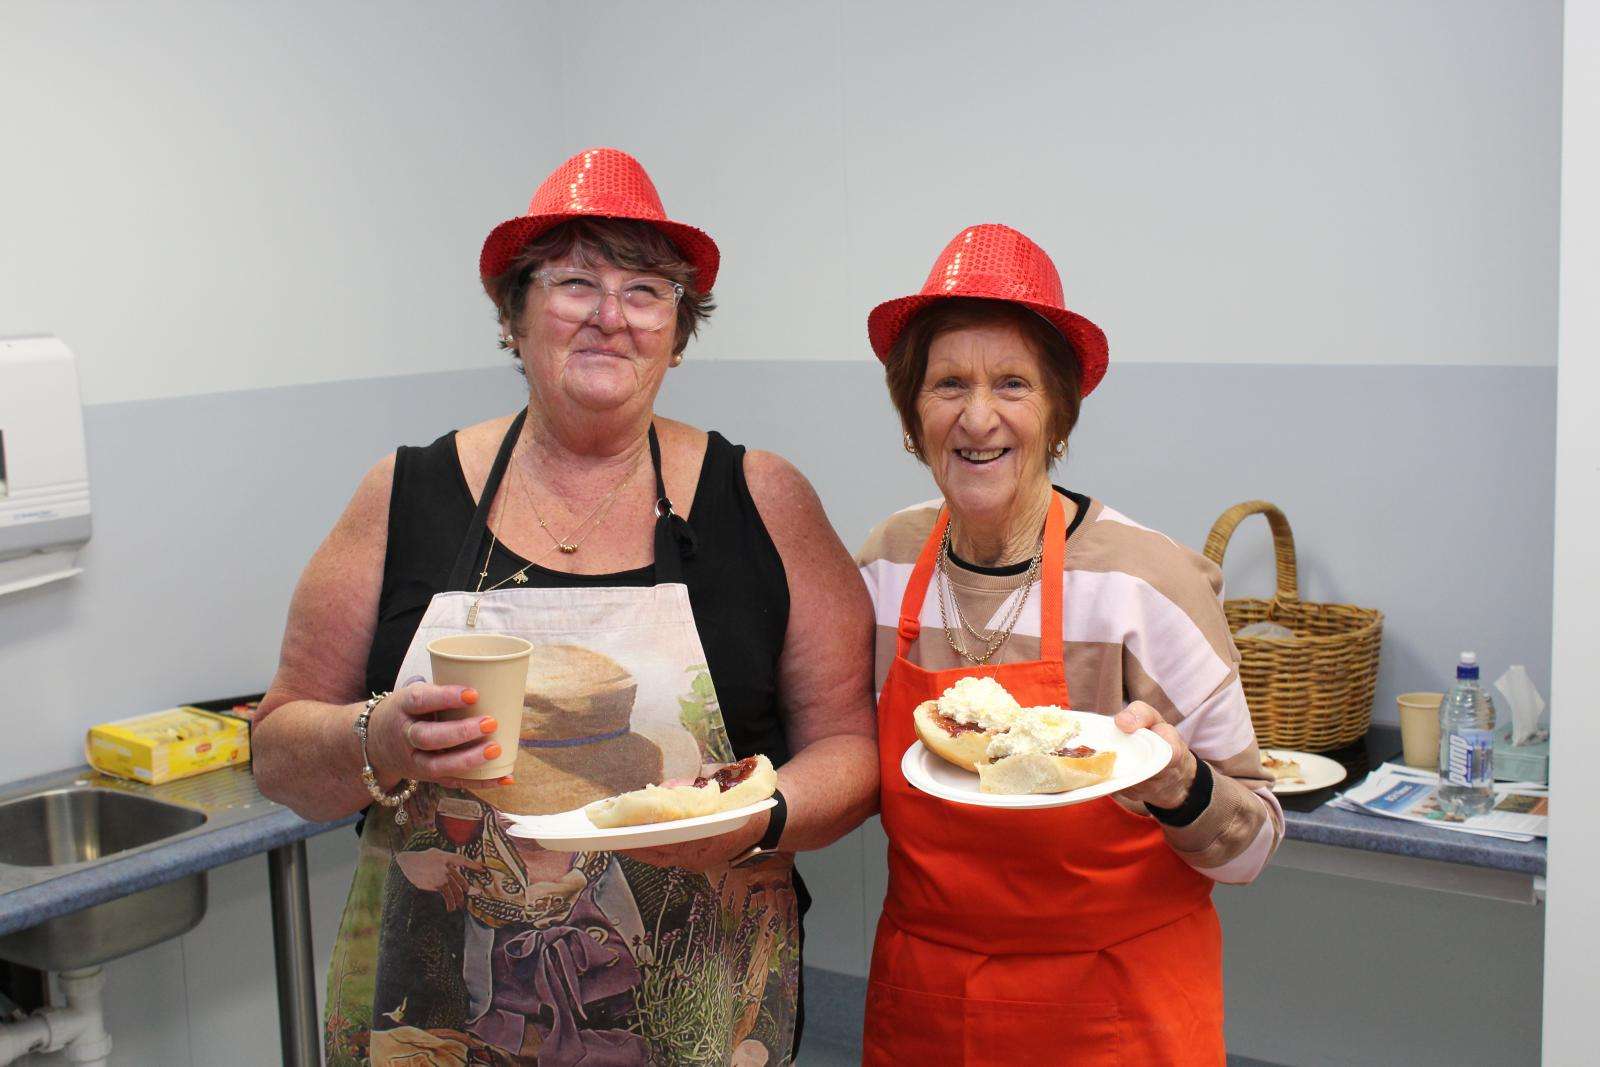 BCH Ladies Auxiliary members Raye Tucker and Maureen Chisholm were among the volunteers serving tasty Devonshire teas.